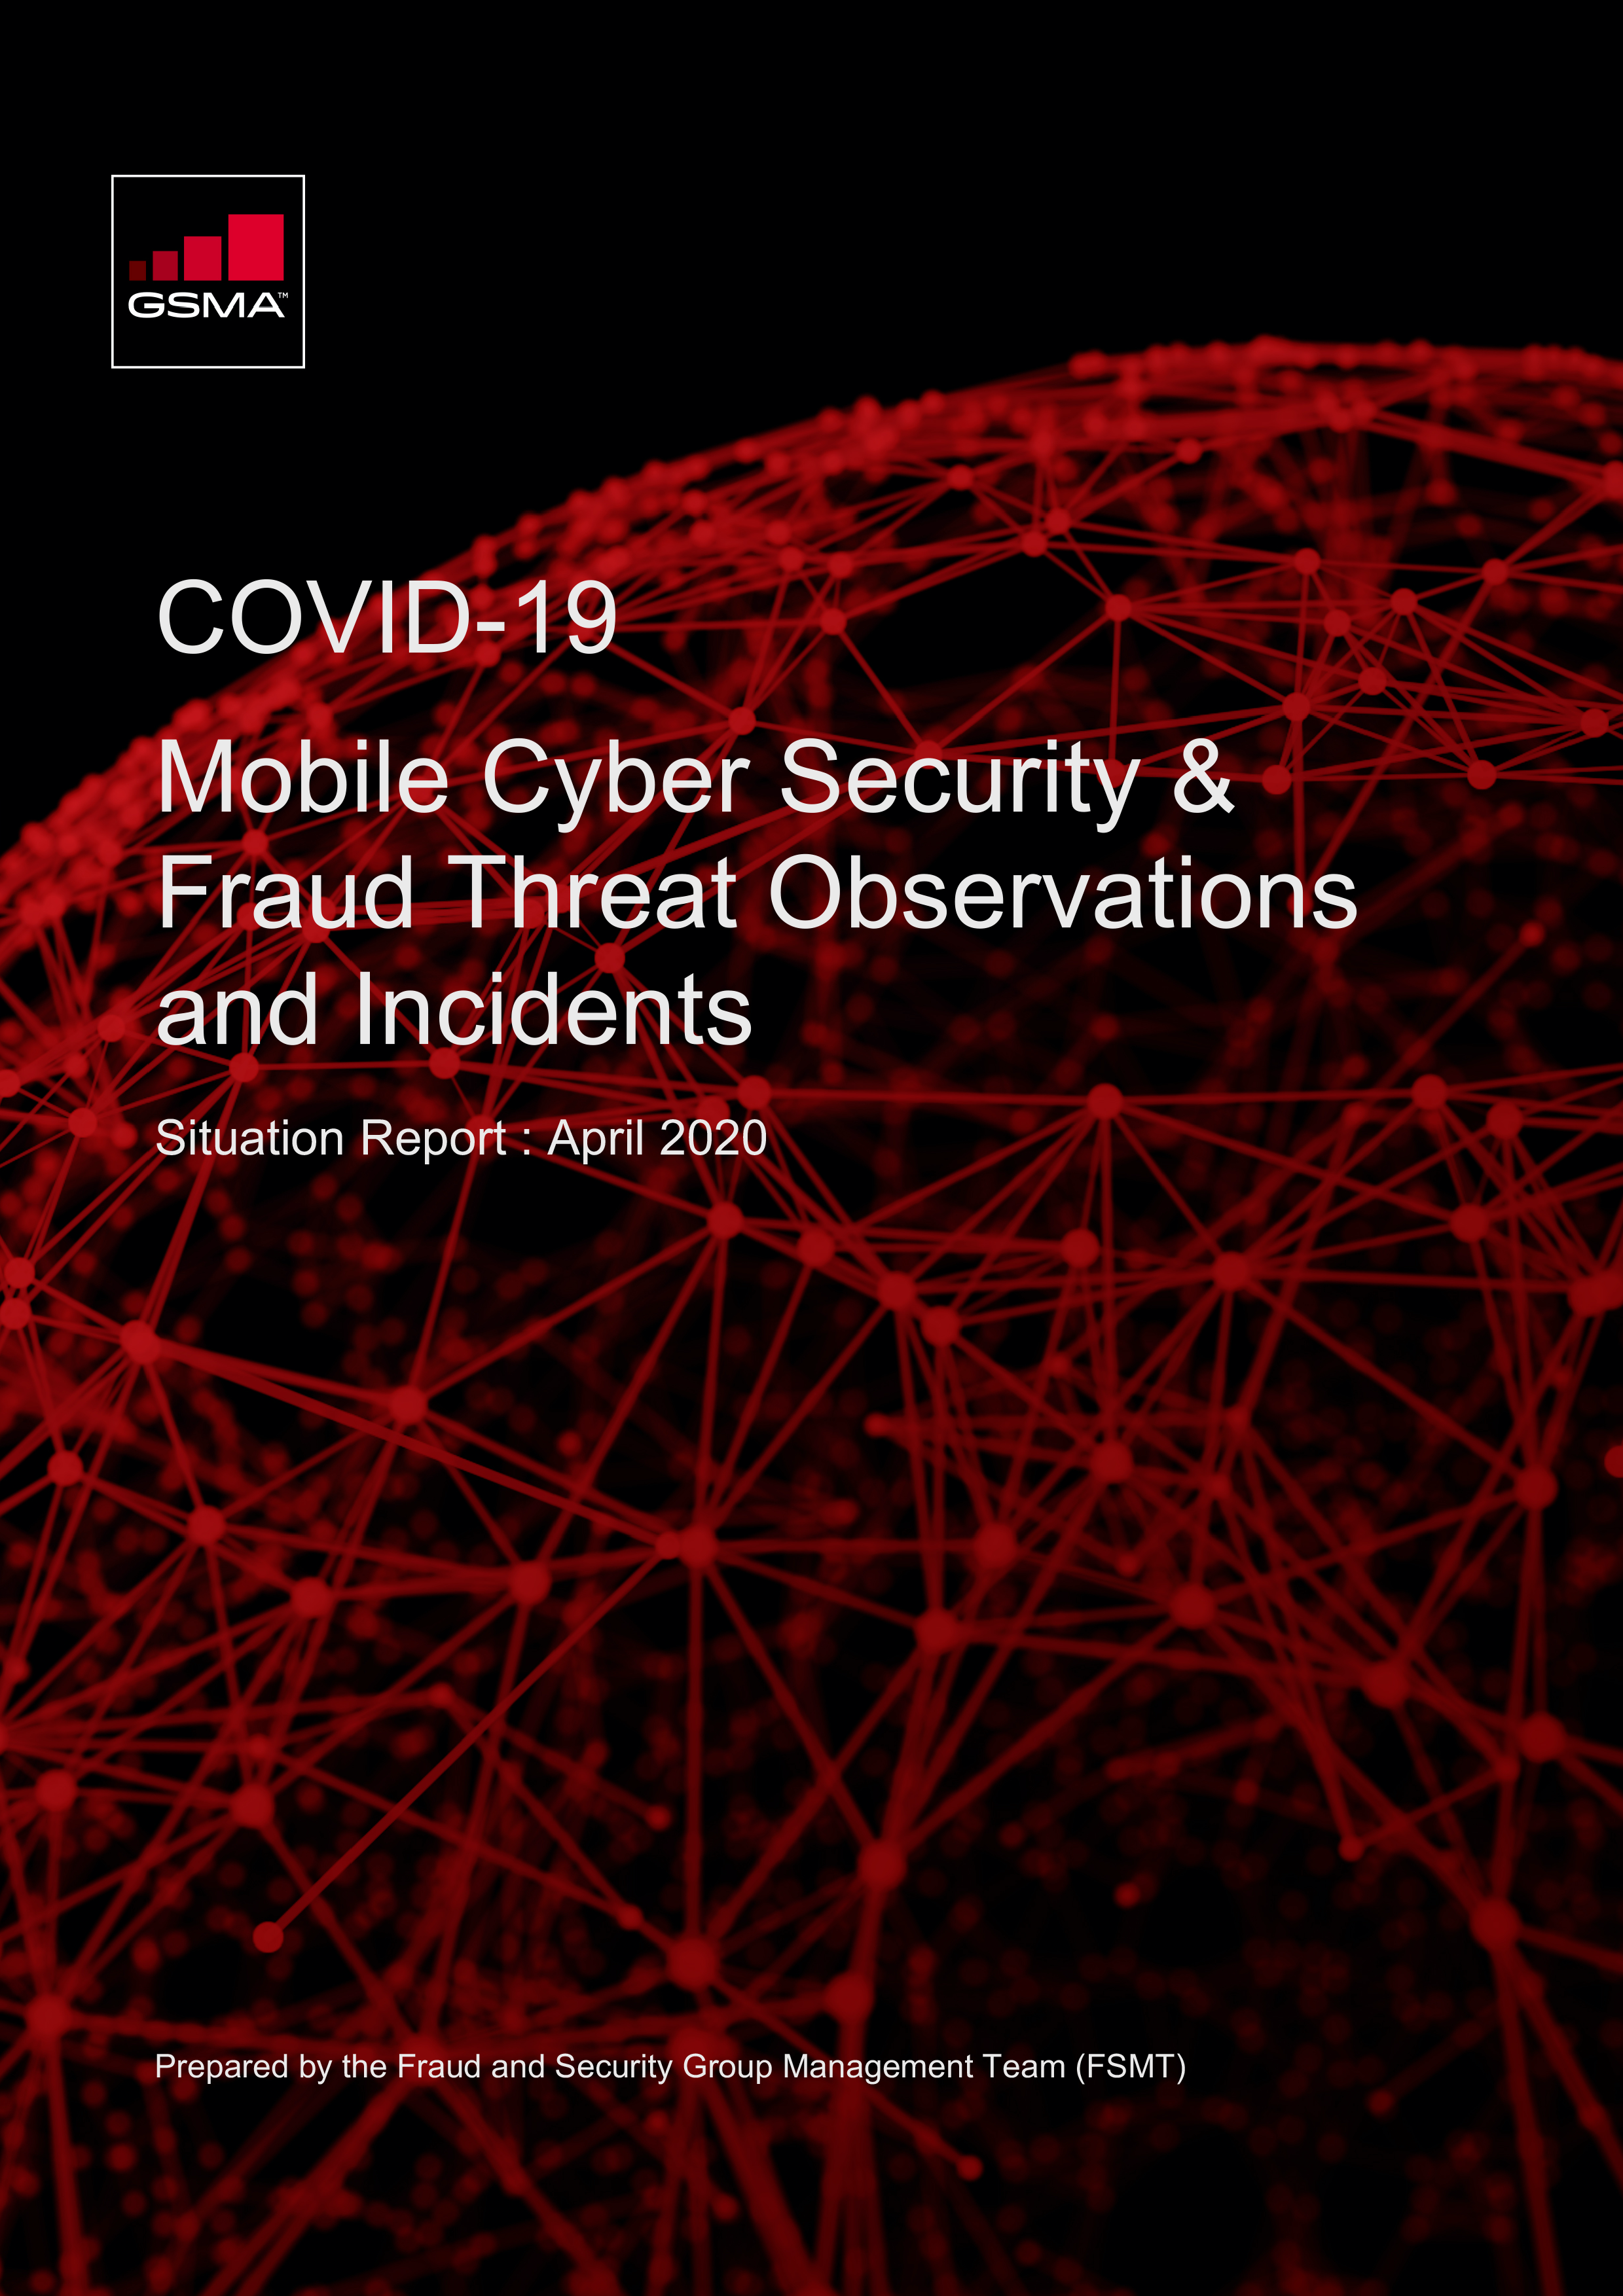 COVID-19: Mobile Cyber Security & Fraud Threat Observations and Incidents image